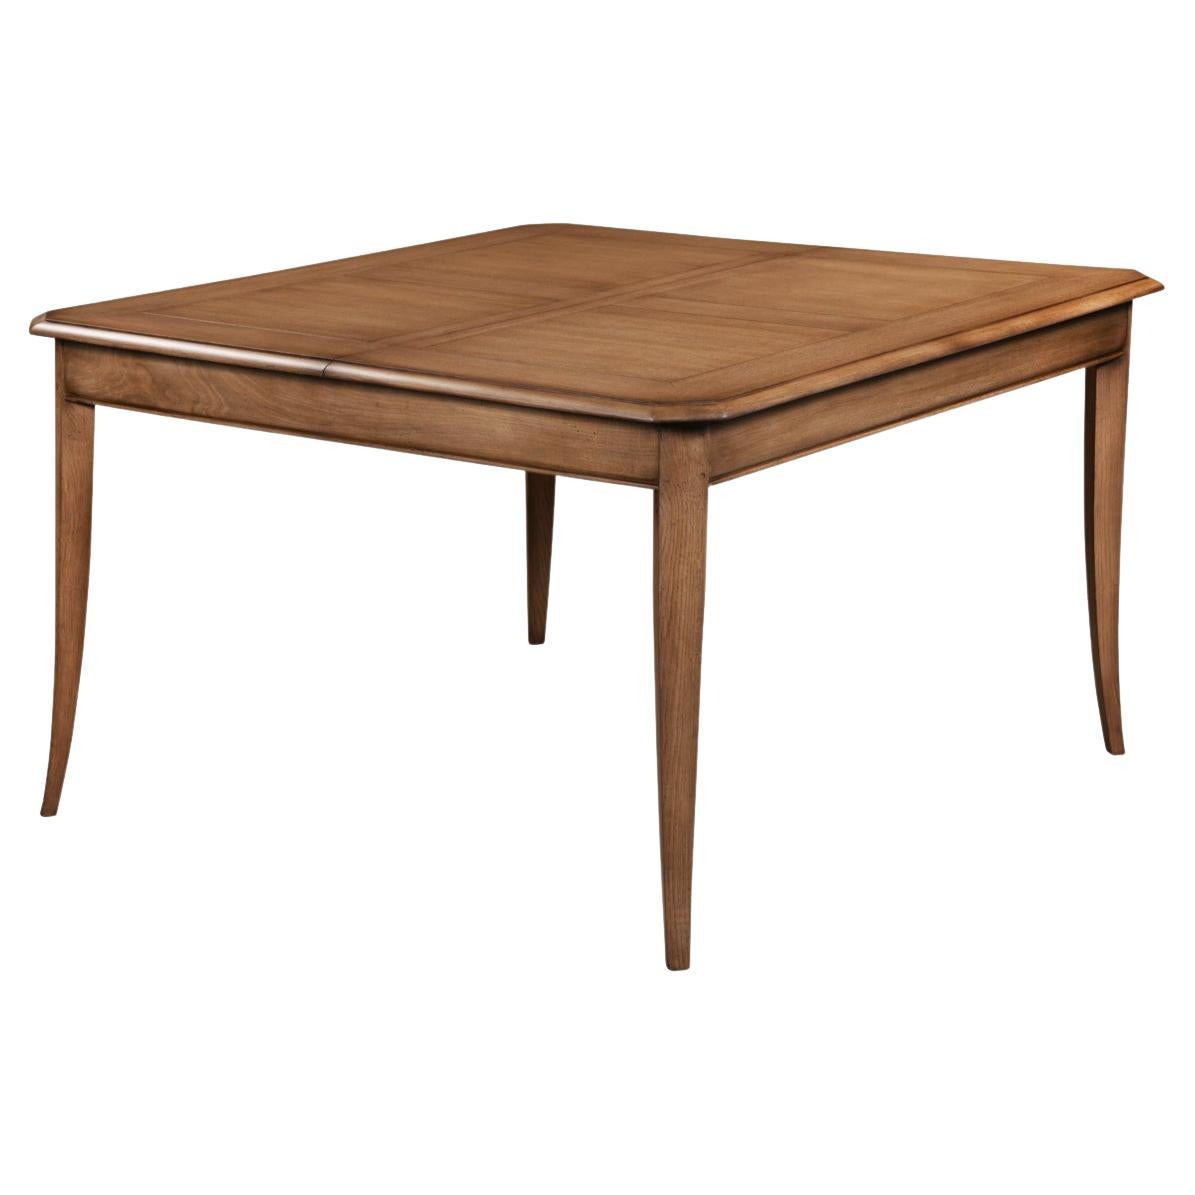 French Tradition Extensible Square Dining Table, Chestnut Stained For Sale